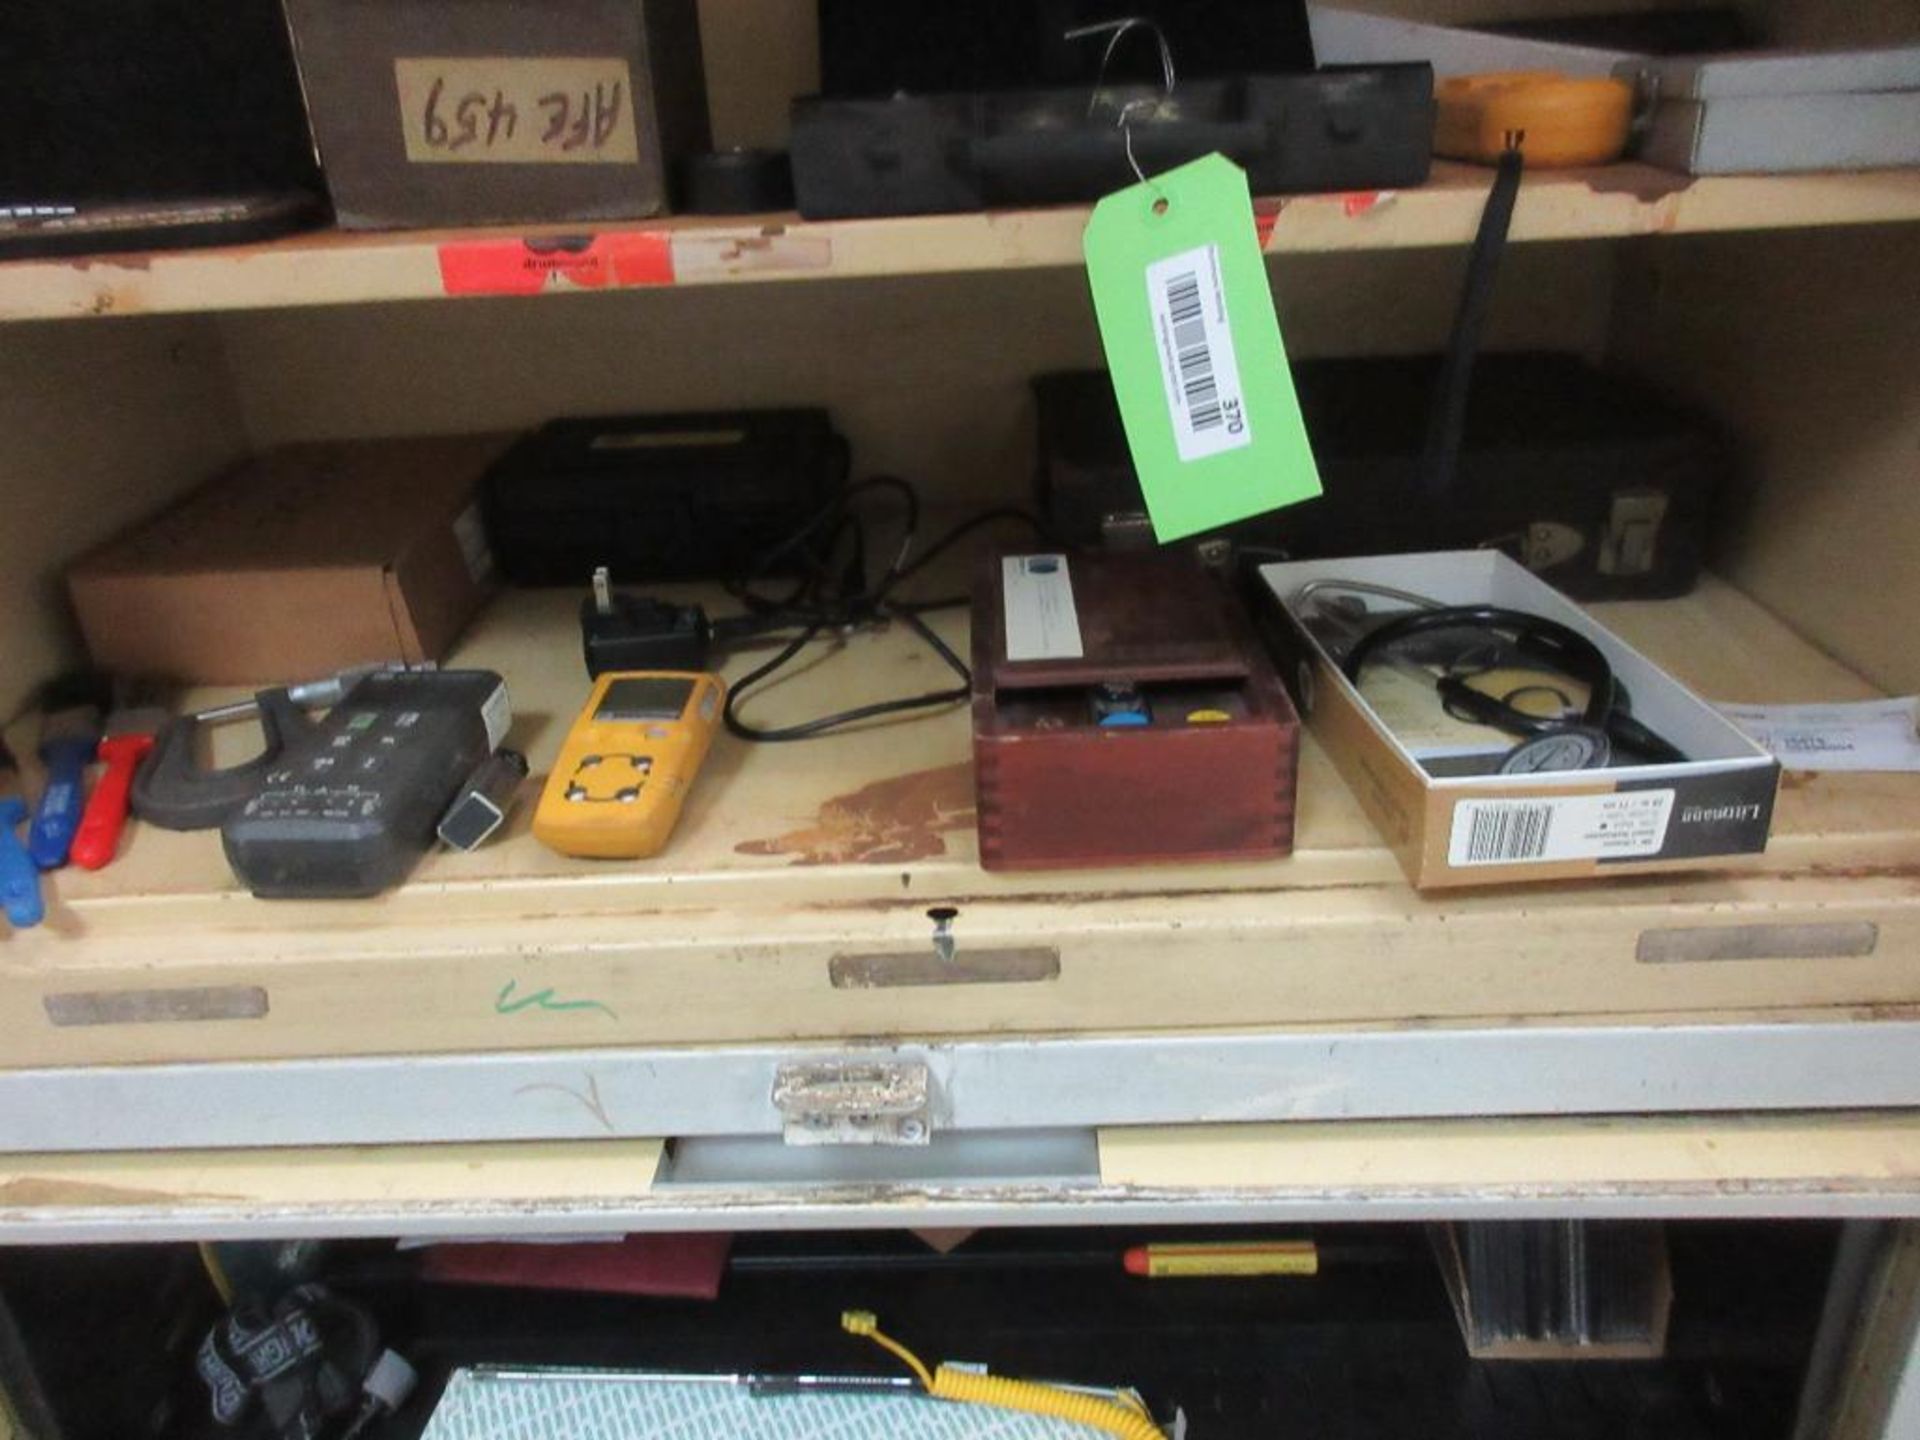 CONTENTS OF 3 CABINETS IN WORK AREA, TEST AND MEASUREMENT EQUIPMENT, METERS, TOOLS, ETC (OFFICES) - Image 4 of 18